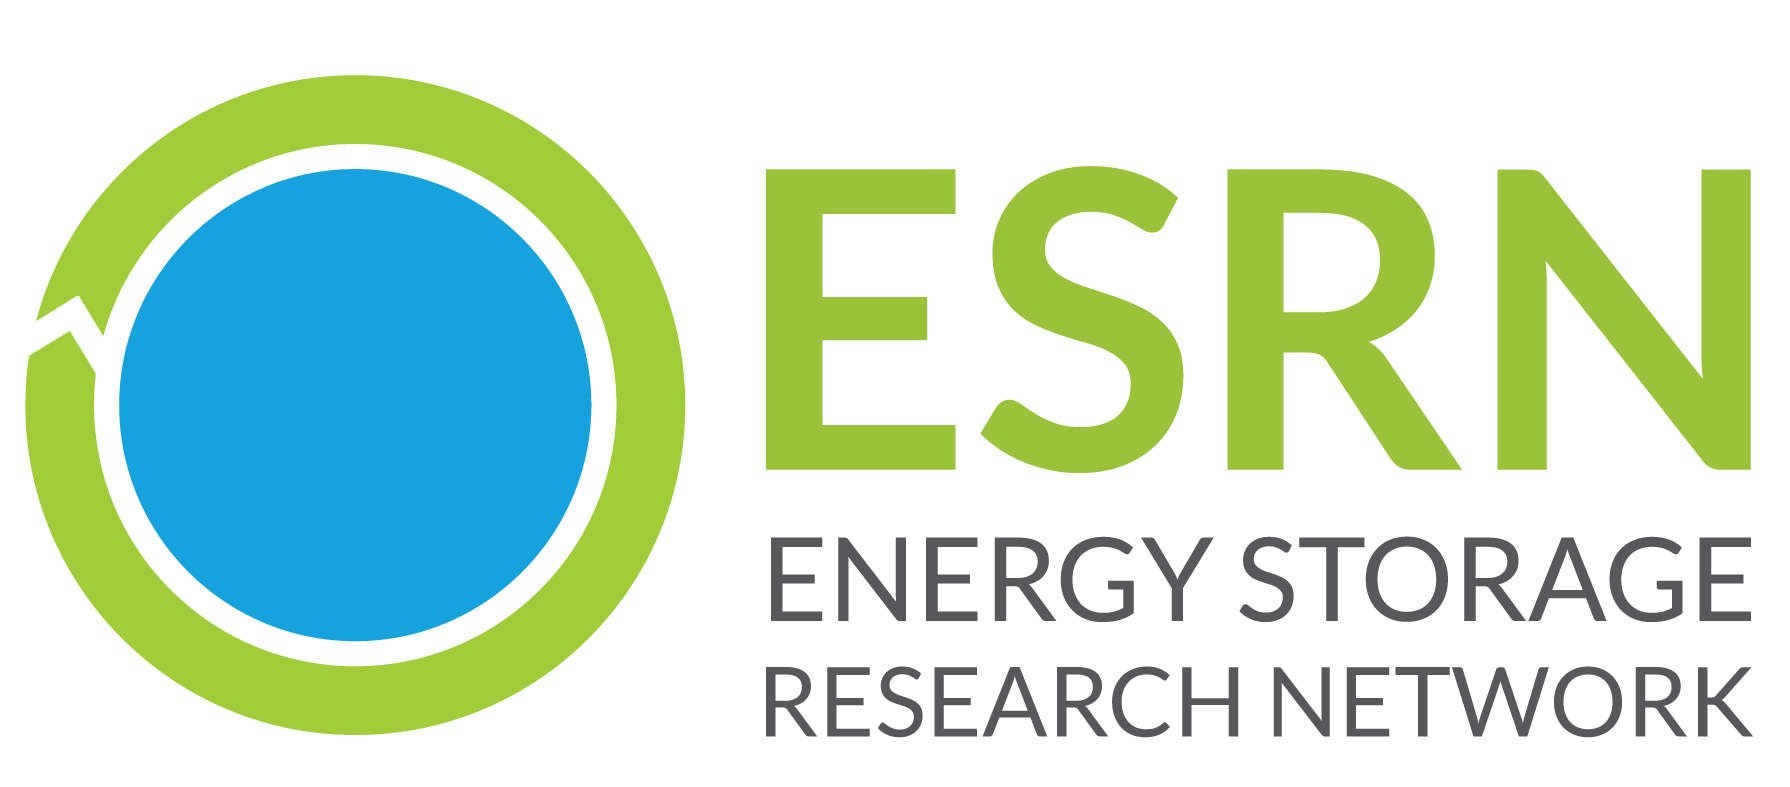 Logo of the Energy Storage Research Network